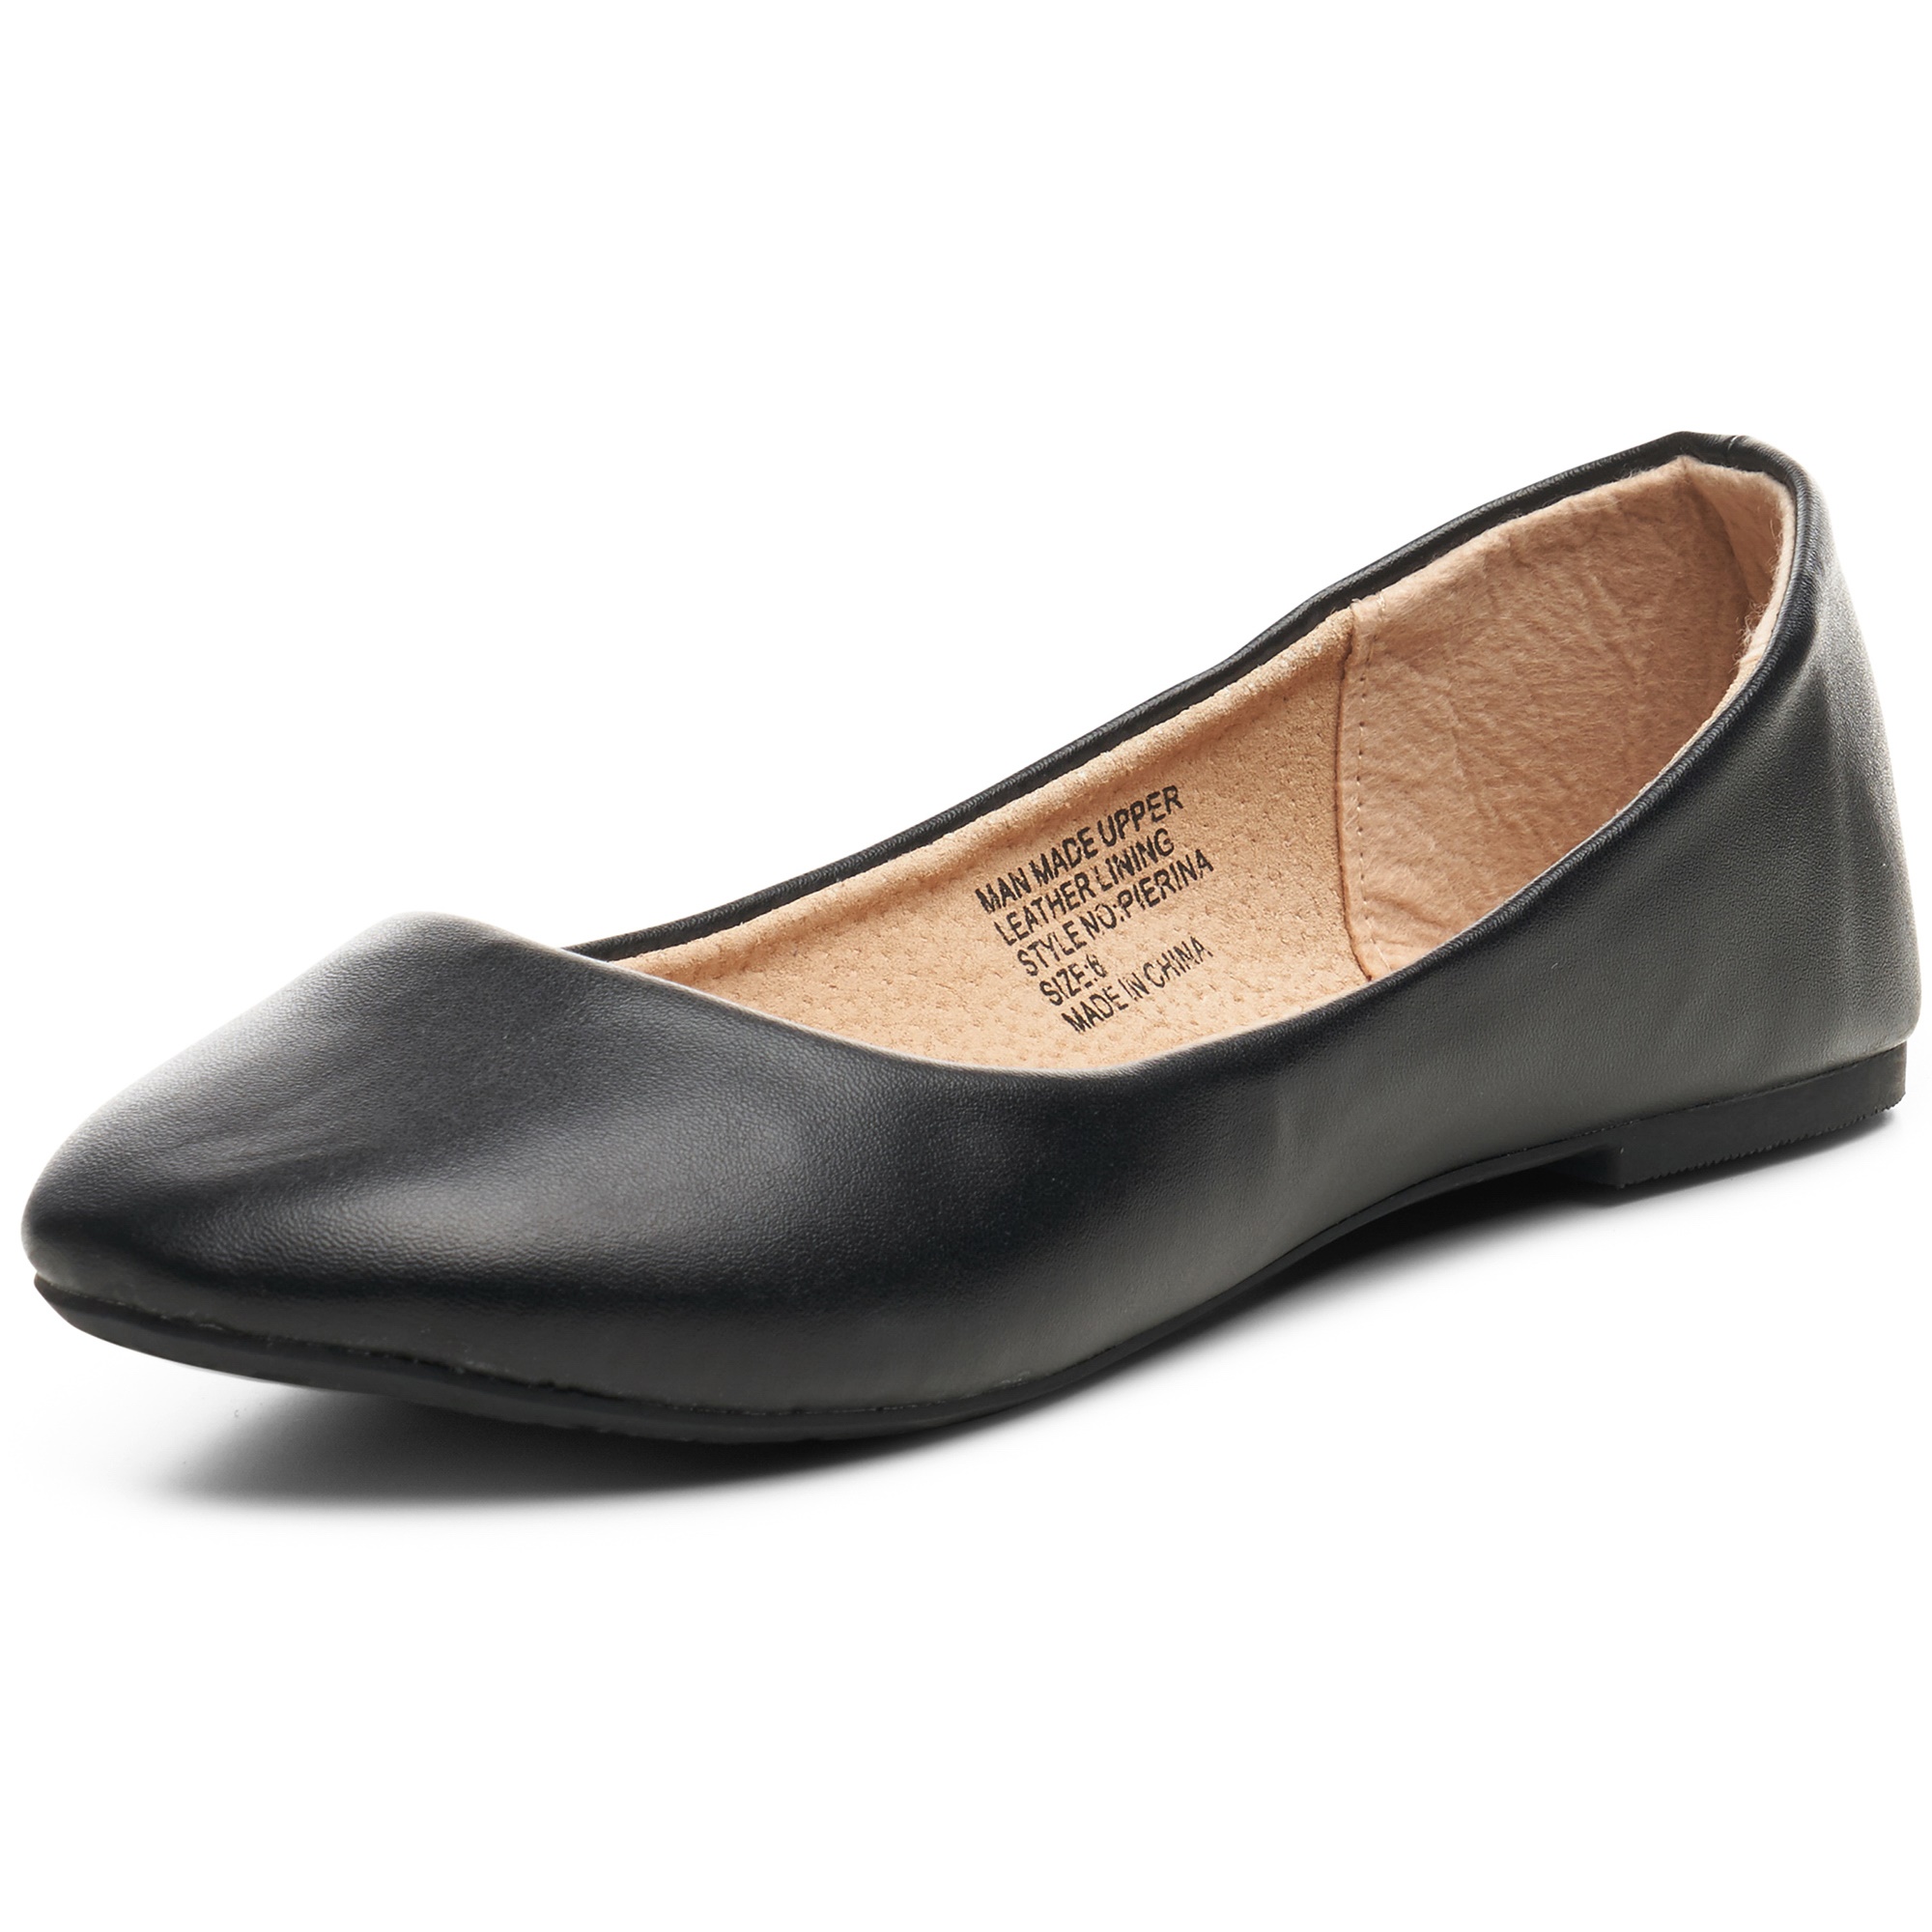 Alpine Swiss Pierina Womens Ballet Flats Leather Lined Classic Slip On Shoes - image 1 of 7